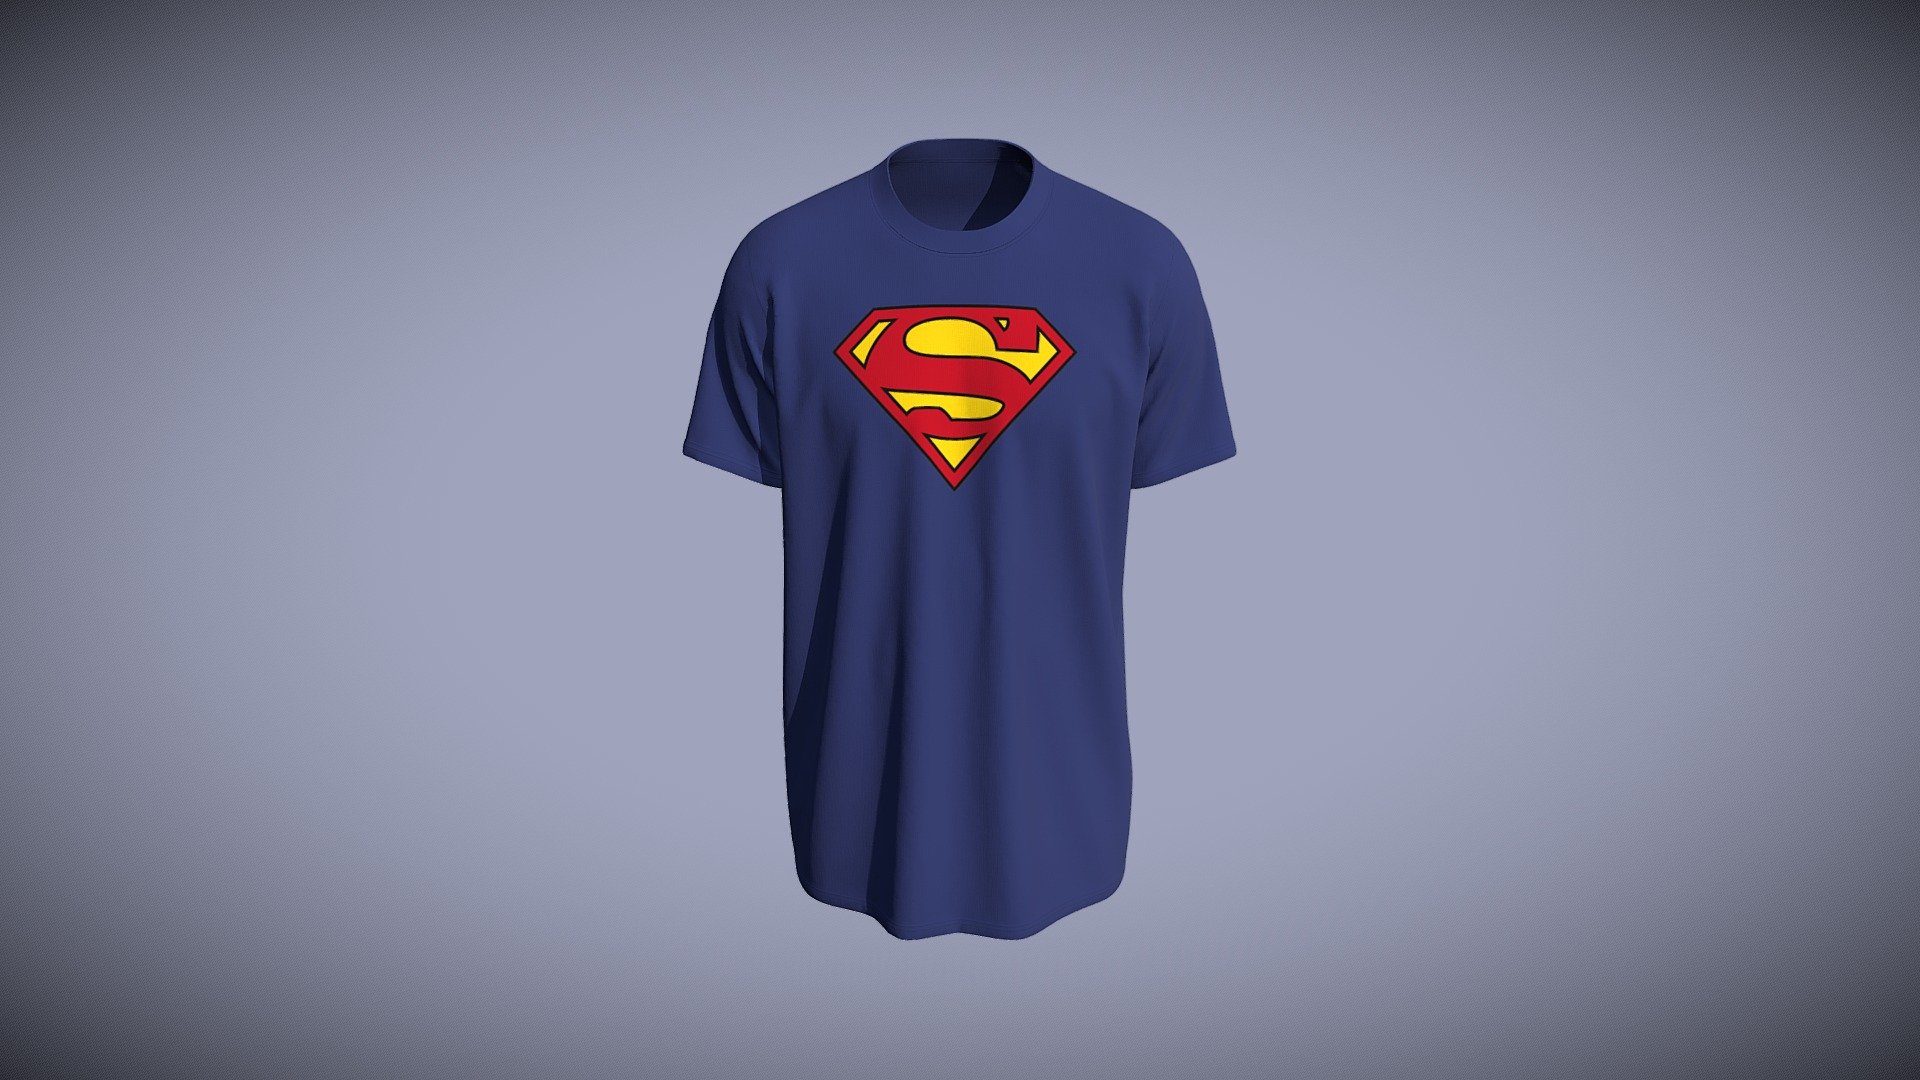 Cloth Title = Loose Fit Tee Superman Print Design 

SKU = DG100038 

Category = Unisex 

Product Type = Tee 

Cloth Length = Regular 

Body Fit = Relaxed Fit 

Occasion = Casual  

Sleeve Style = Set In Sleeve  


Our Services:

3D Apparel Design.

OBJ,FBX,GLTF Making with High/Low Poly.

Fabric Digitalization.

Mockup making.

3D Teck Pack

Pattern Making

2D Illustration

Cloth Animation and 360 Spin Video


Contact us:- 

Email: info@digitalfashionwear.com 

Website: https://digitalfashionwear.com 

WhatsApp No: +8801759350445 


We designed all the types of cloth specially focused on product visualization, e-commerce, fitting, and production. 

We will design: 

T-shirts 

Polo shirts 

Hoodies 

Sweatshirt 

Jackets 

Shirts 

TankTops 

Trousers 

Bras 

Underwear 

Blazer 

Aprons 

Leggings 

and All Fashion items. 





Our goal is to make sure what we provide you, meets your demand 3d model